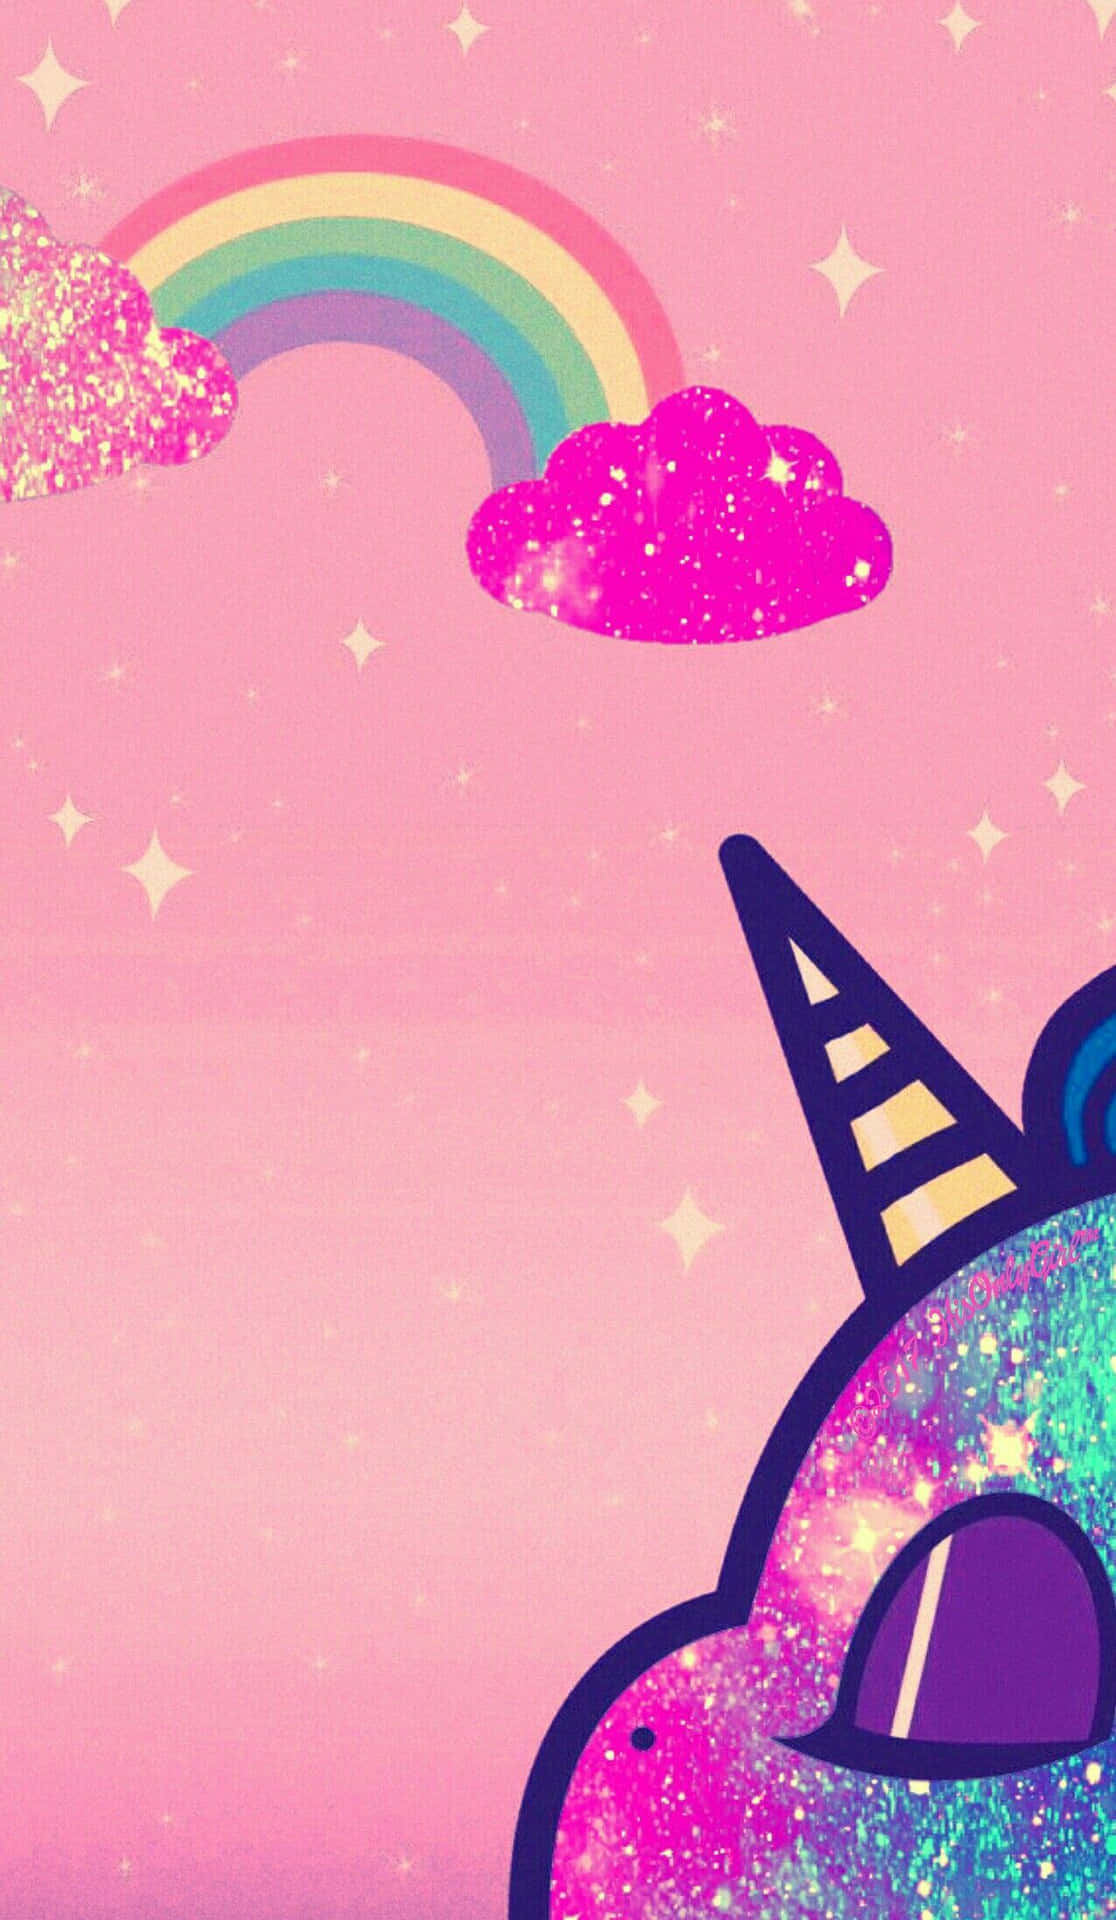 A mystical unicorn for your iPhone! Wallpaper